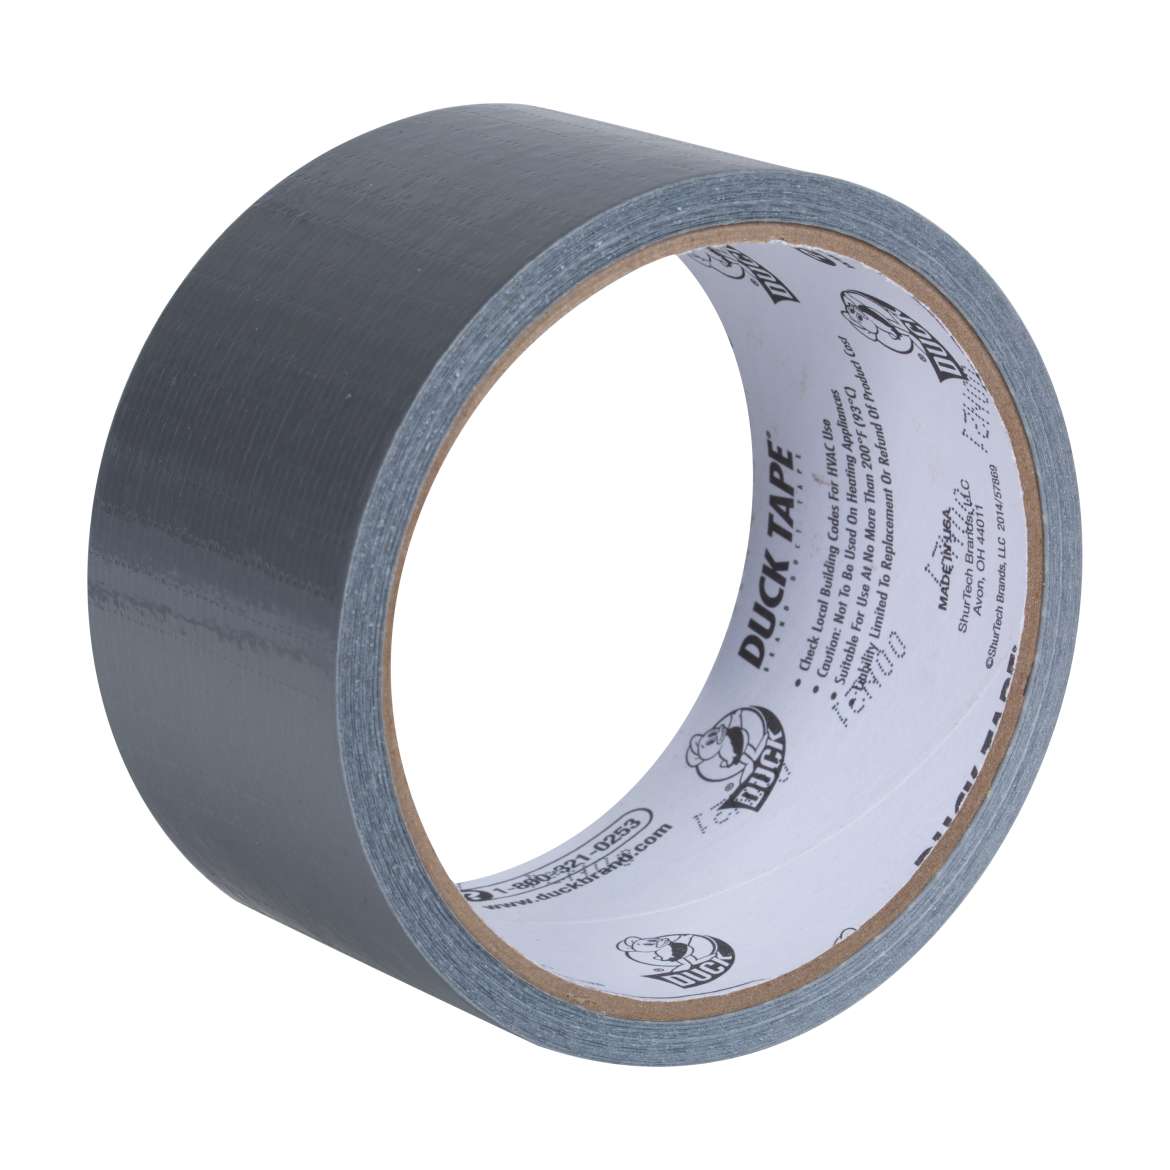 Utility Duct Tape Silver 1.88 in x 10 yd. | Duck Brand